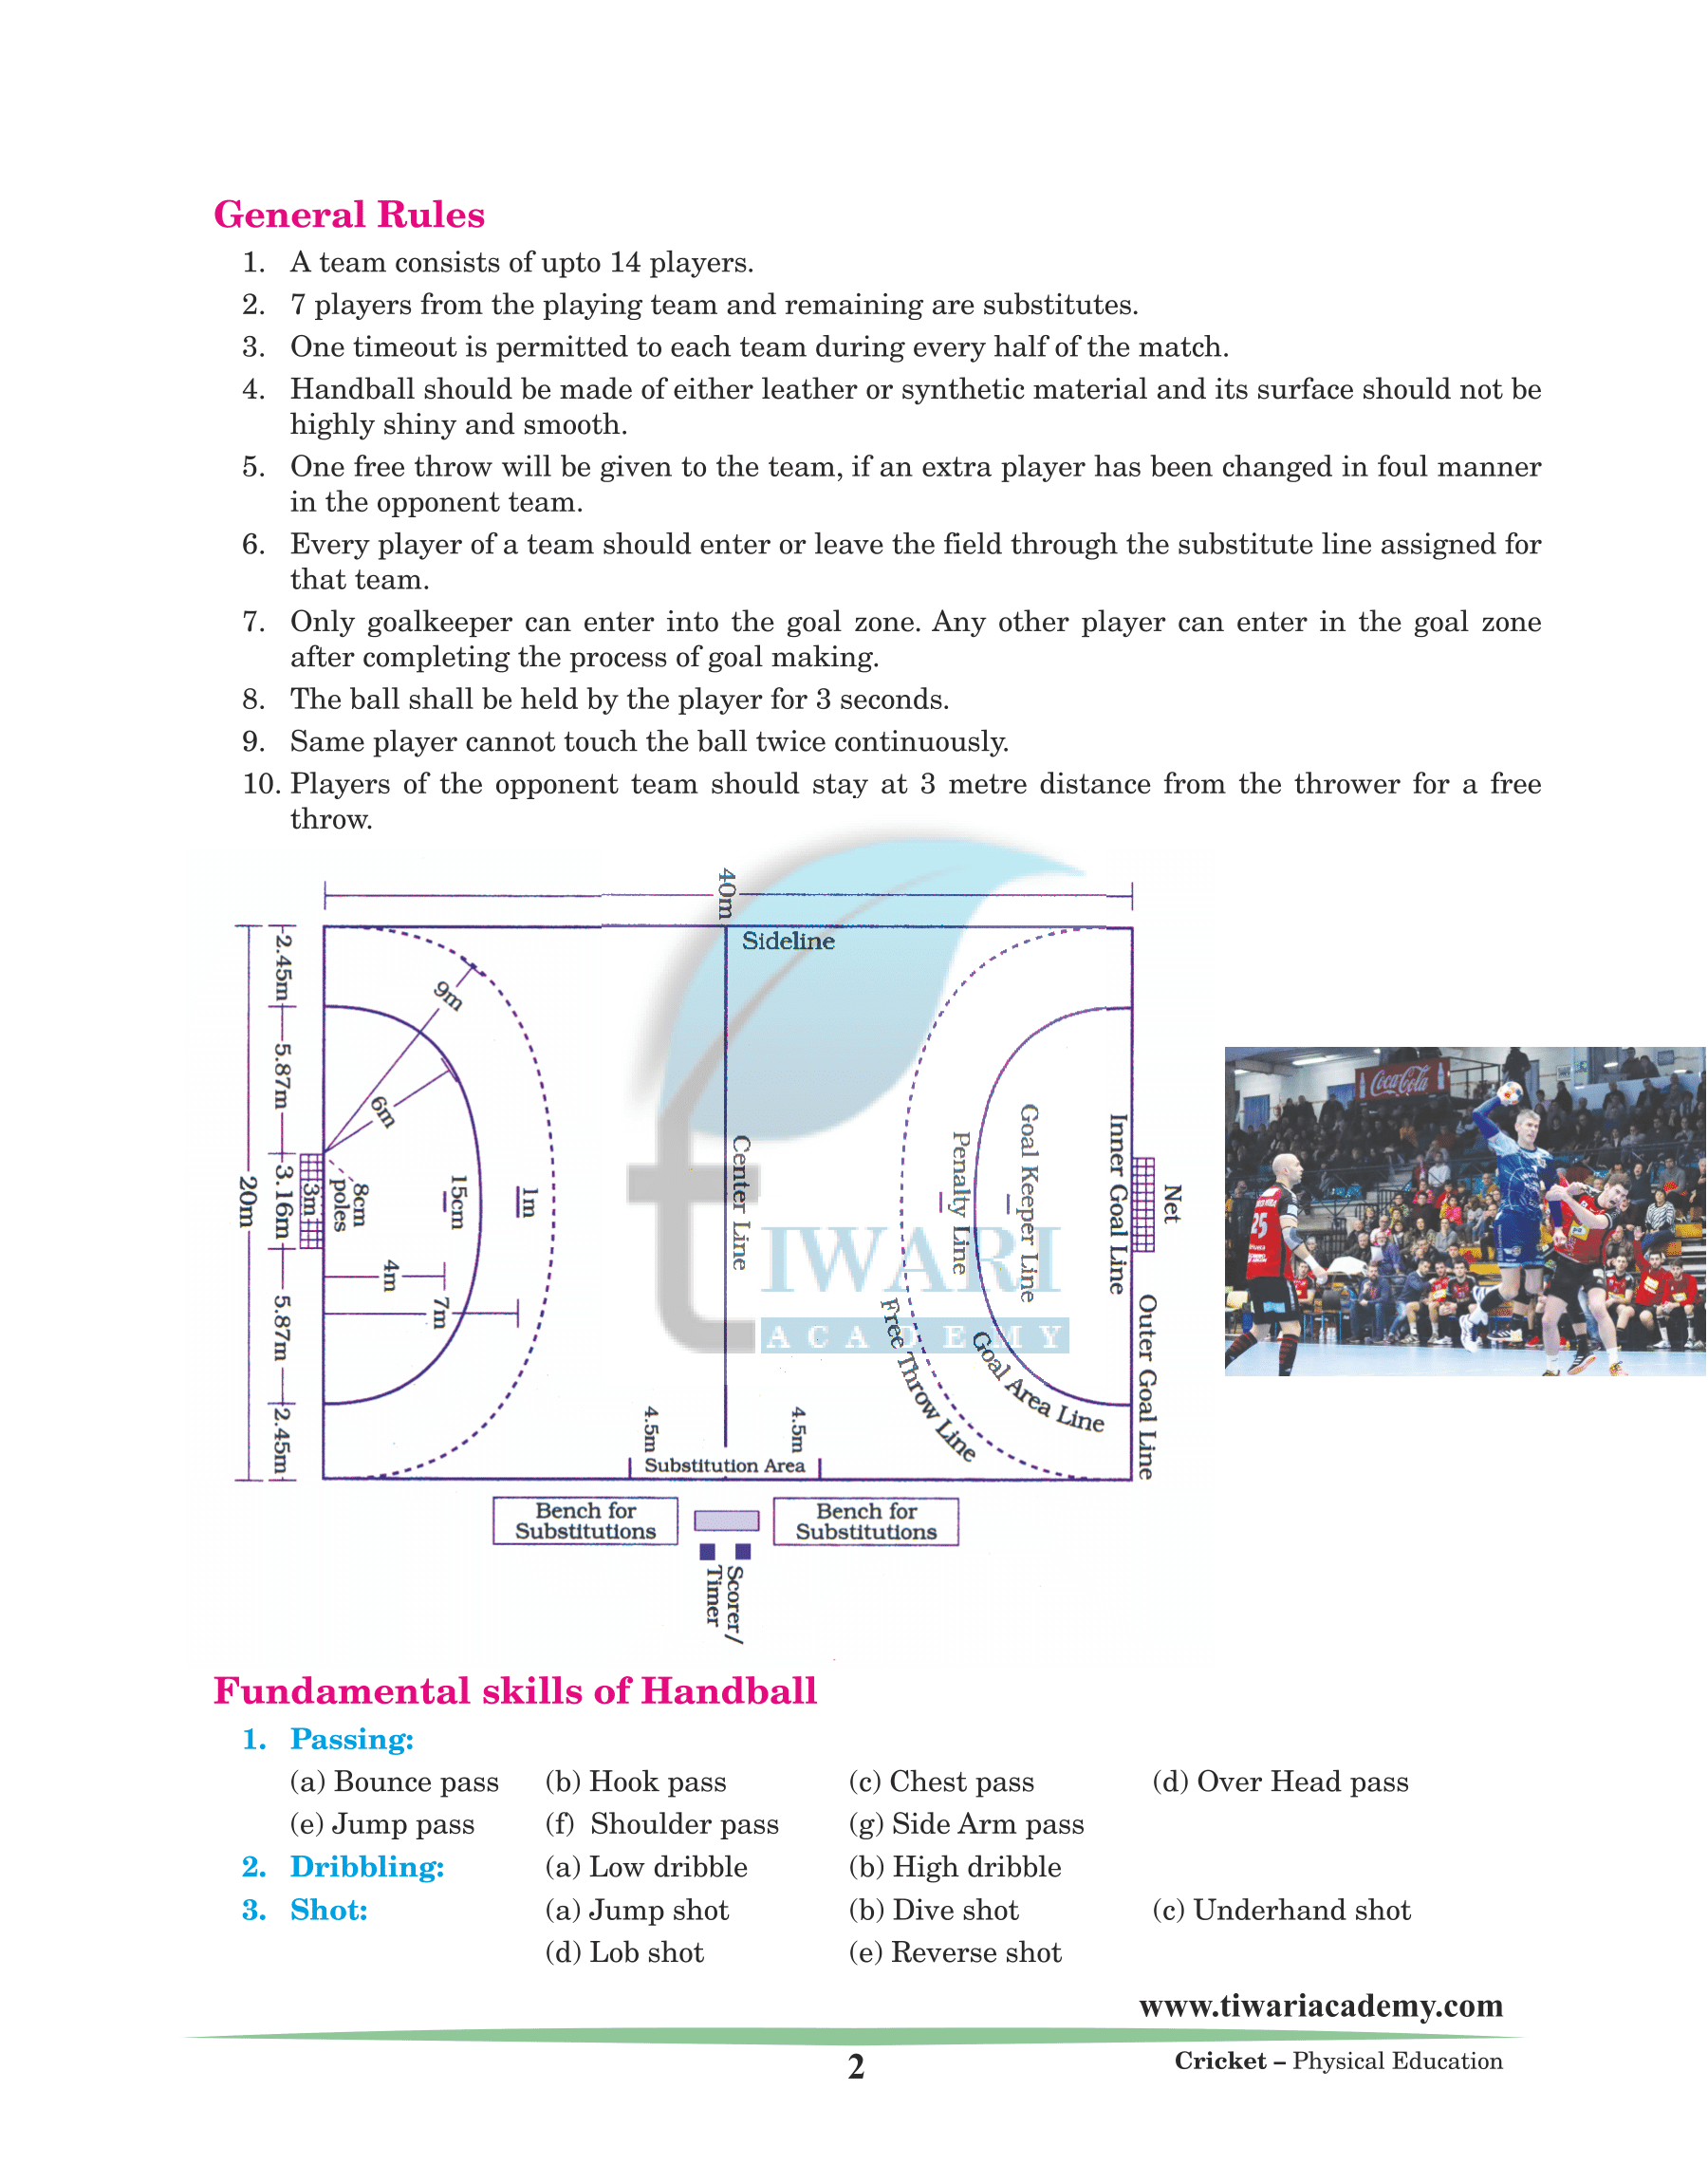 What are the rules of Handball?